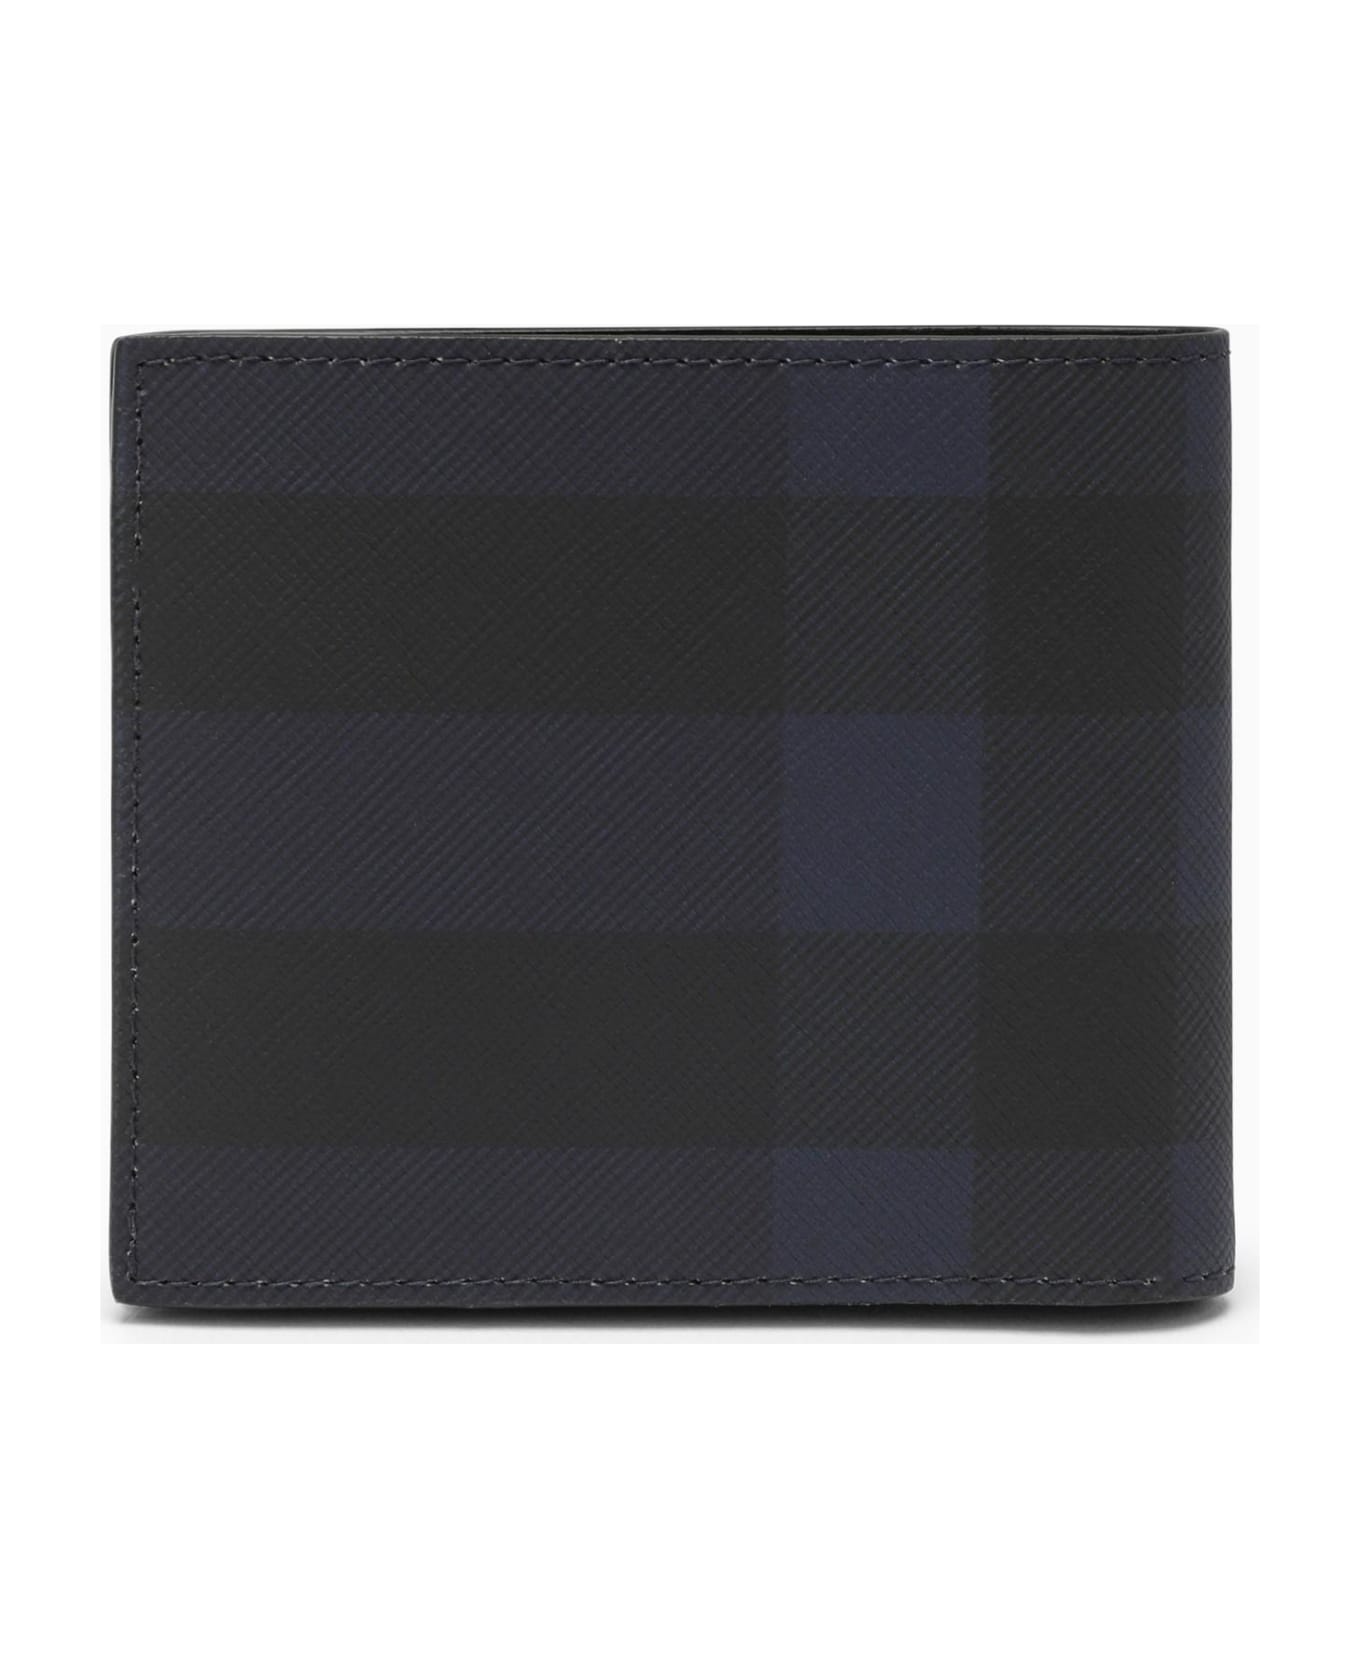 Burberry Check Pattern Navy Blue Wallet - NAVY